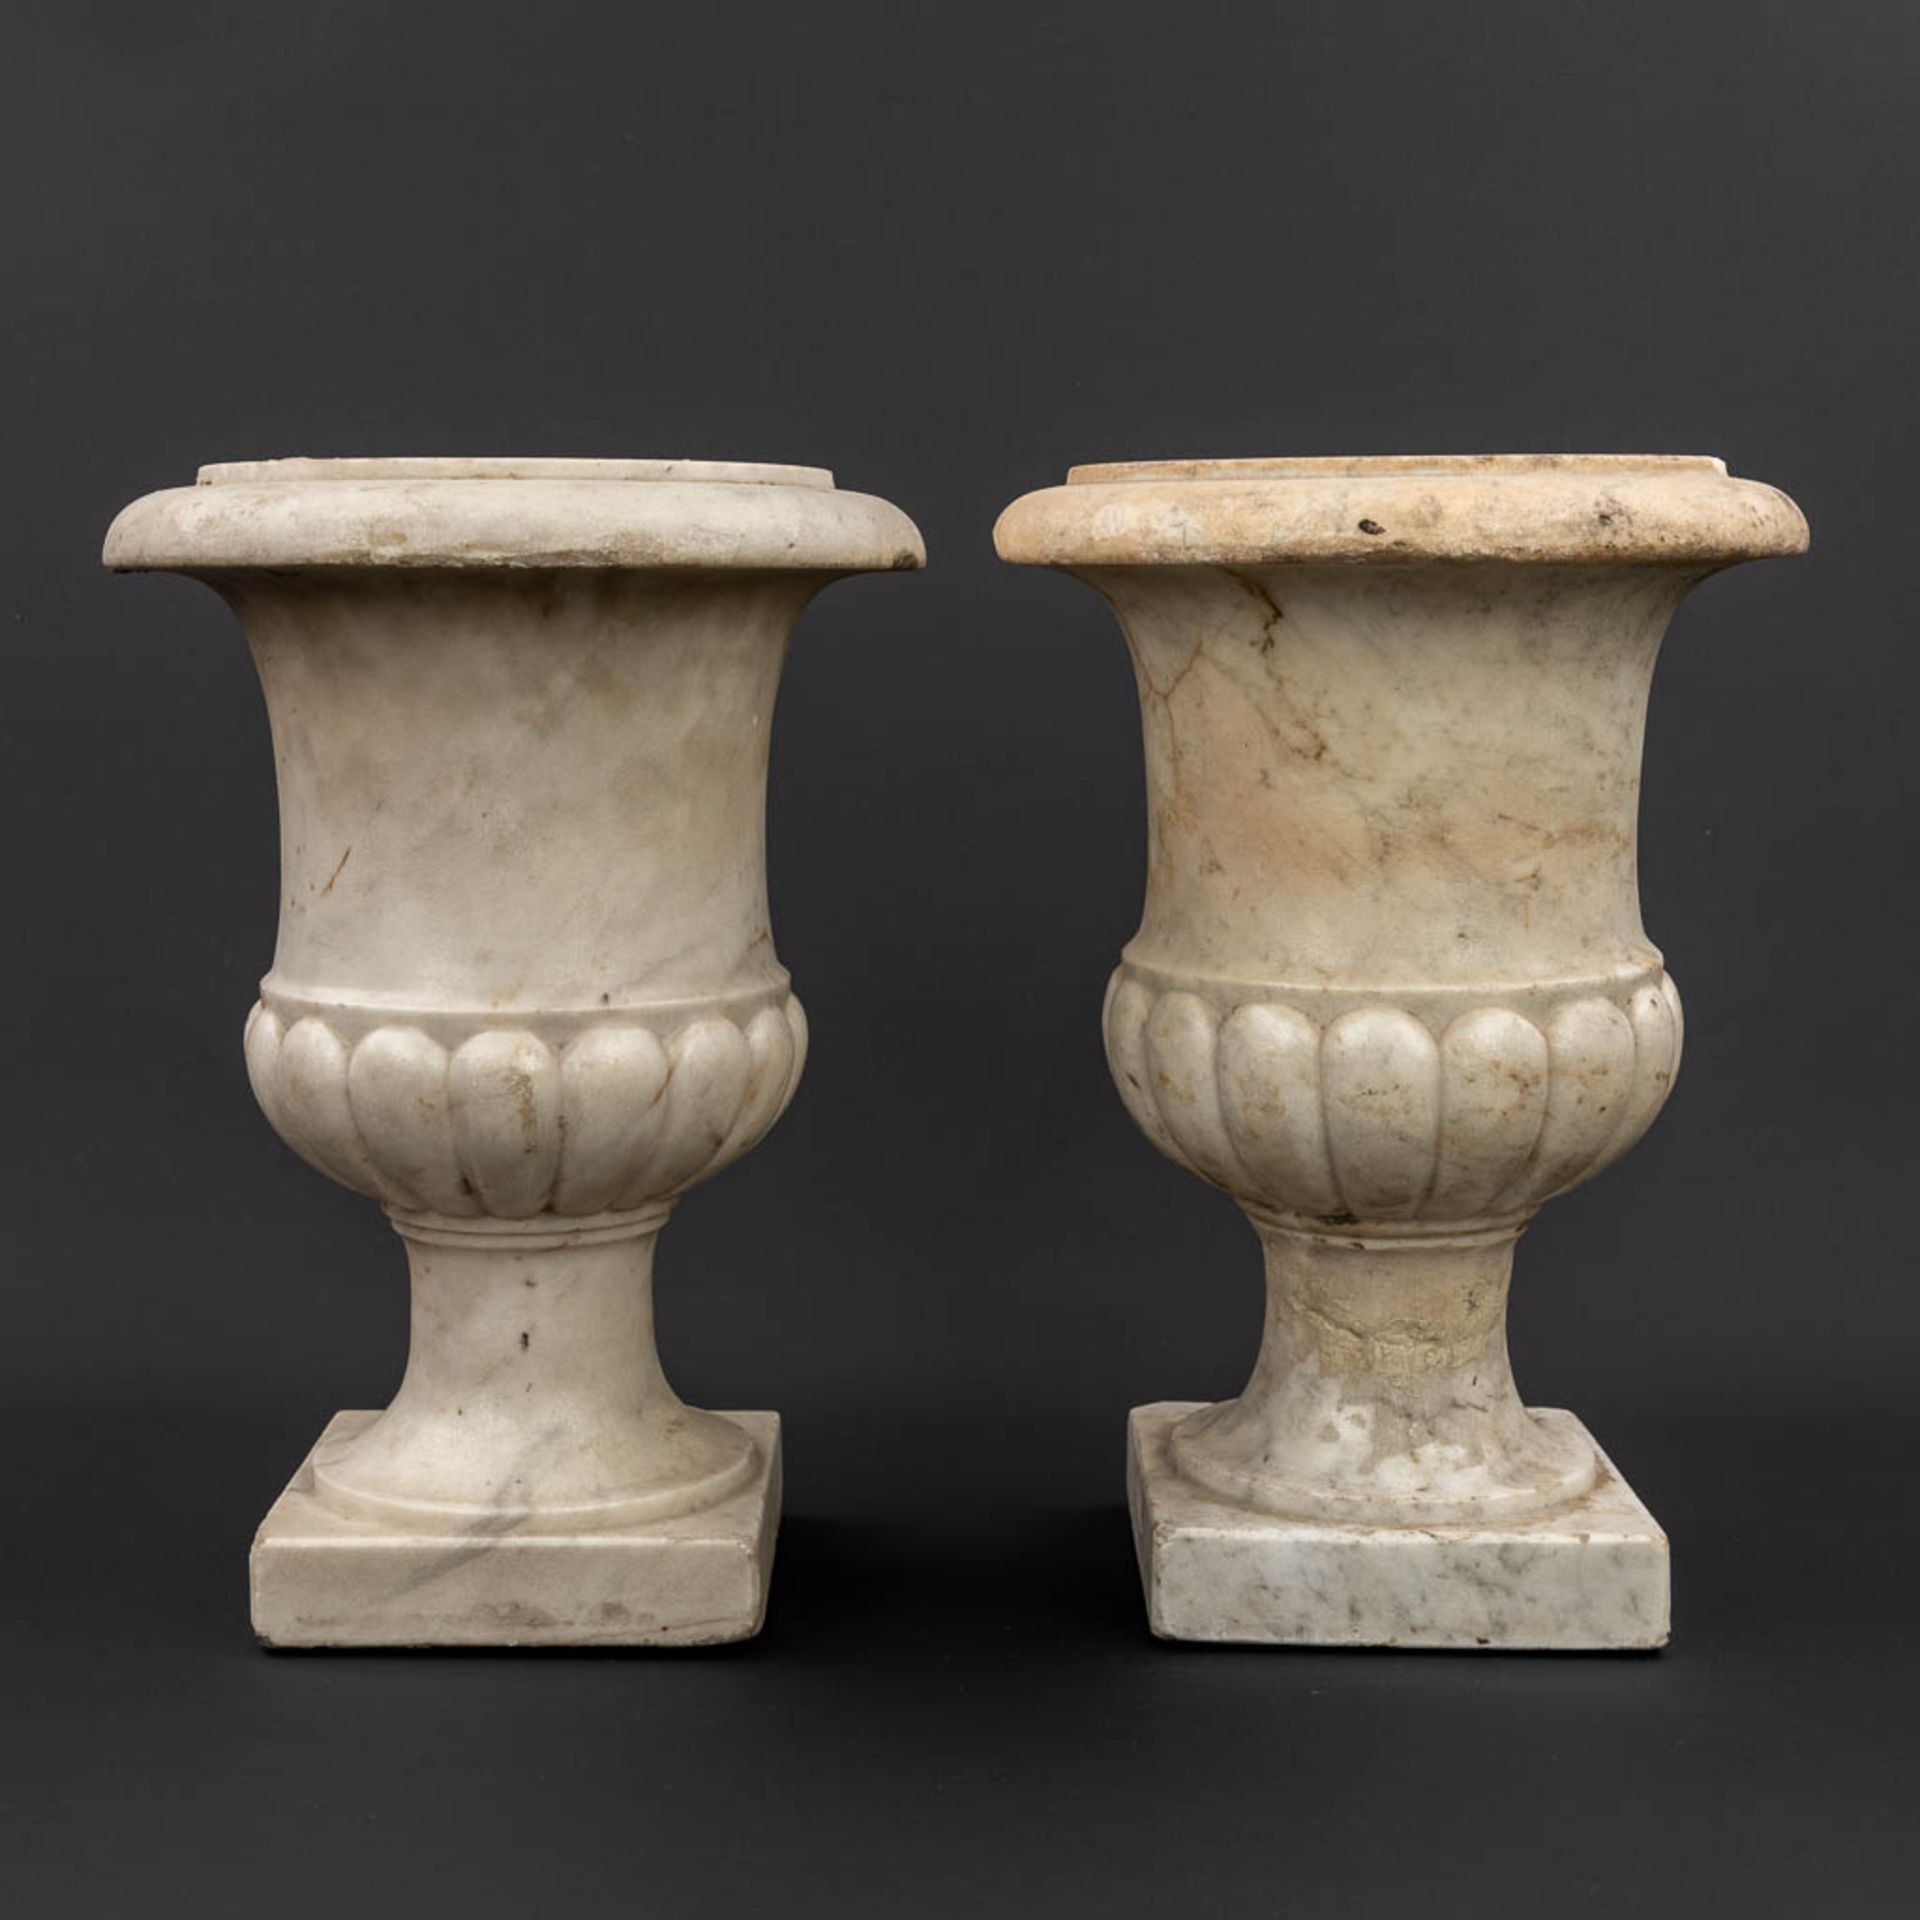 A pair of marble urns 'Medici Vases' made of sculptured marble, 18th C. (H:36 x D:26 cm)